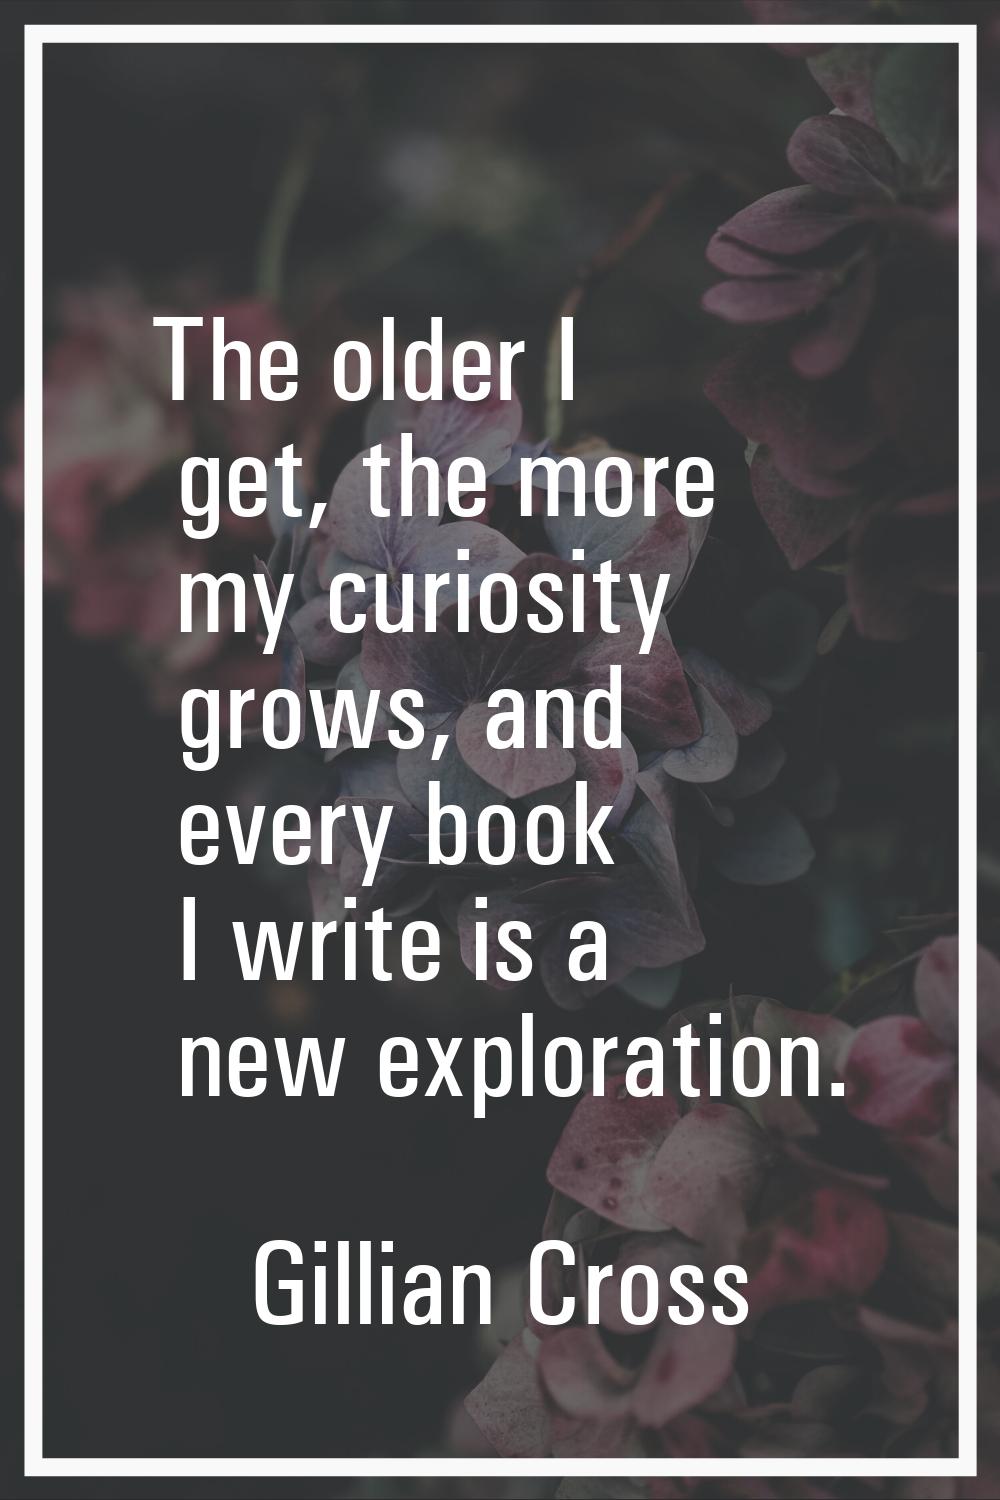 The older I get, the more my curiosity grows, and every book I write is a new exploration.